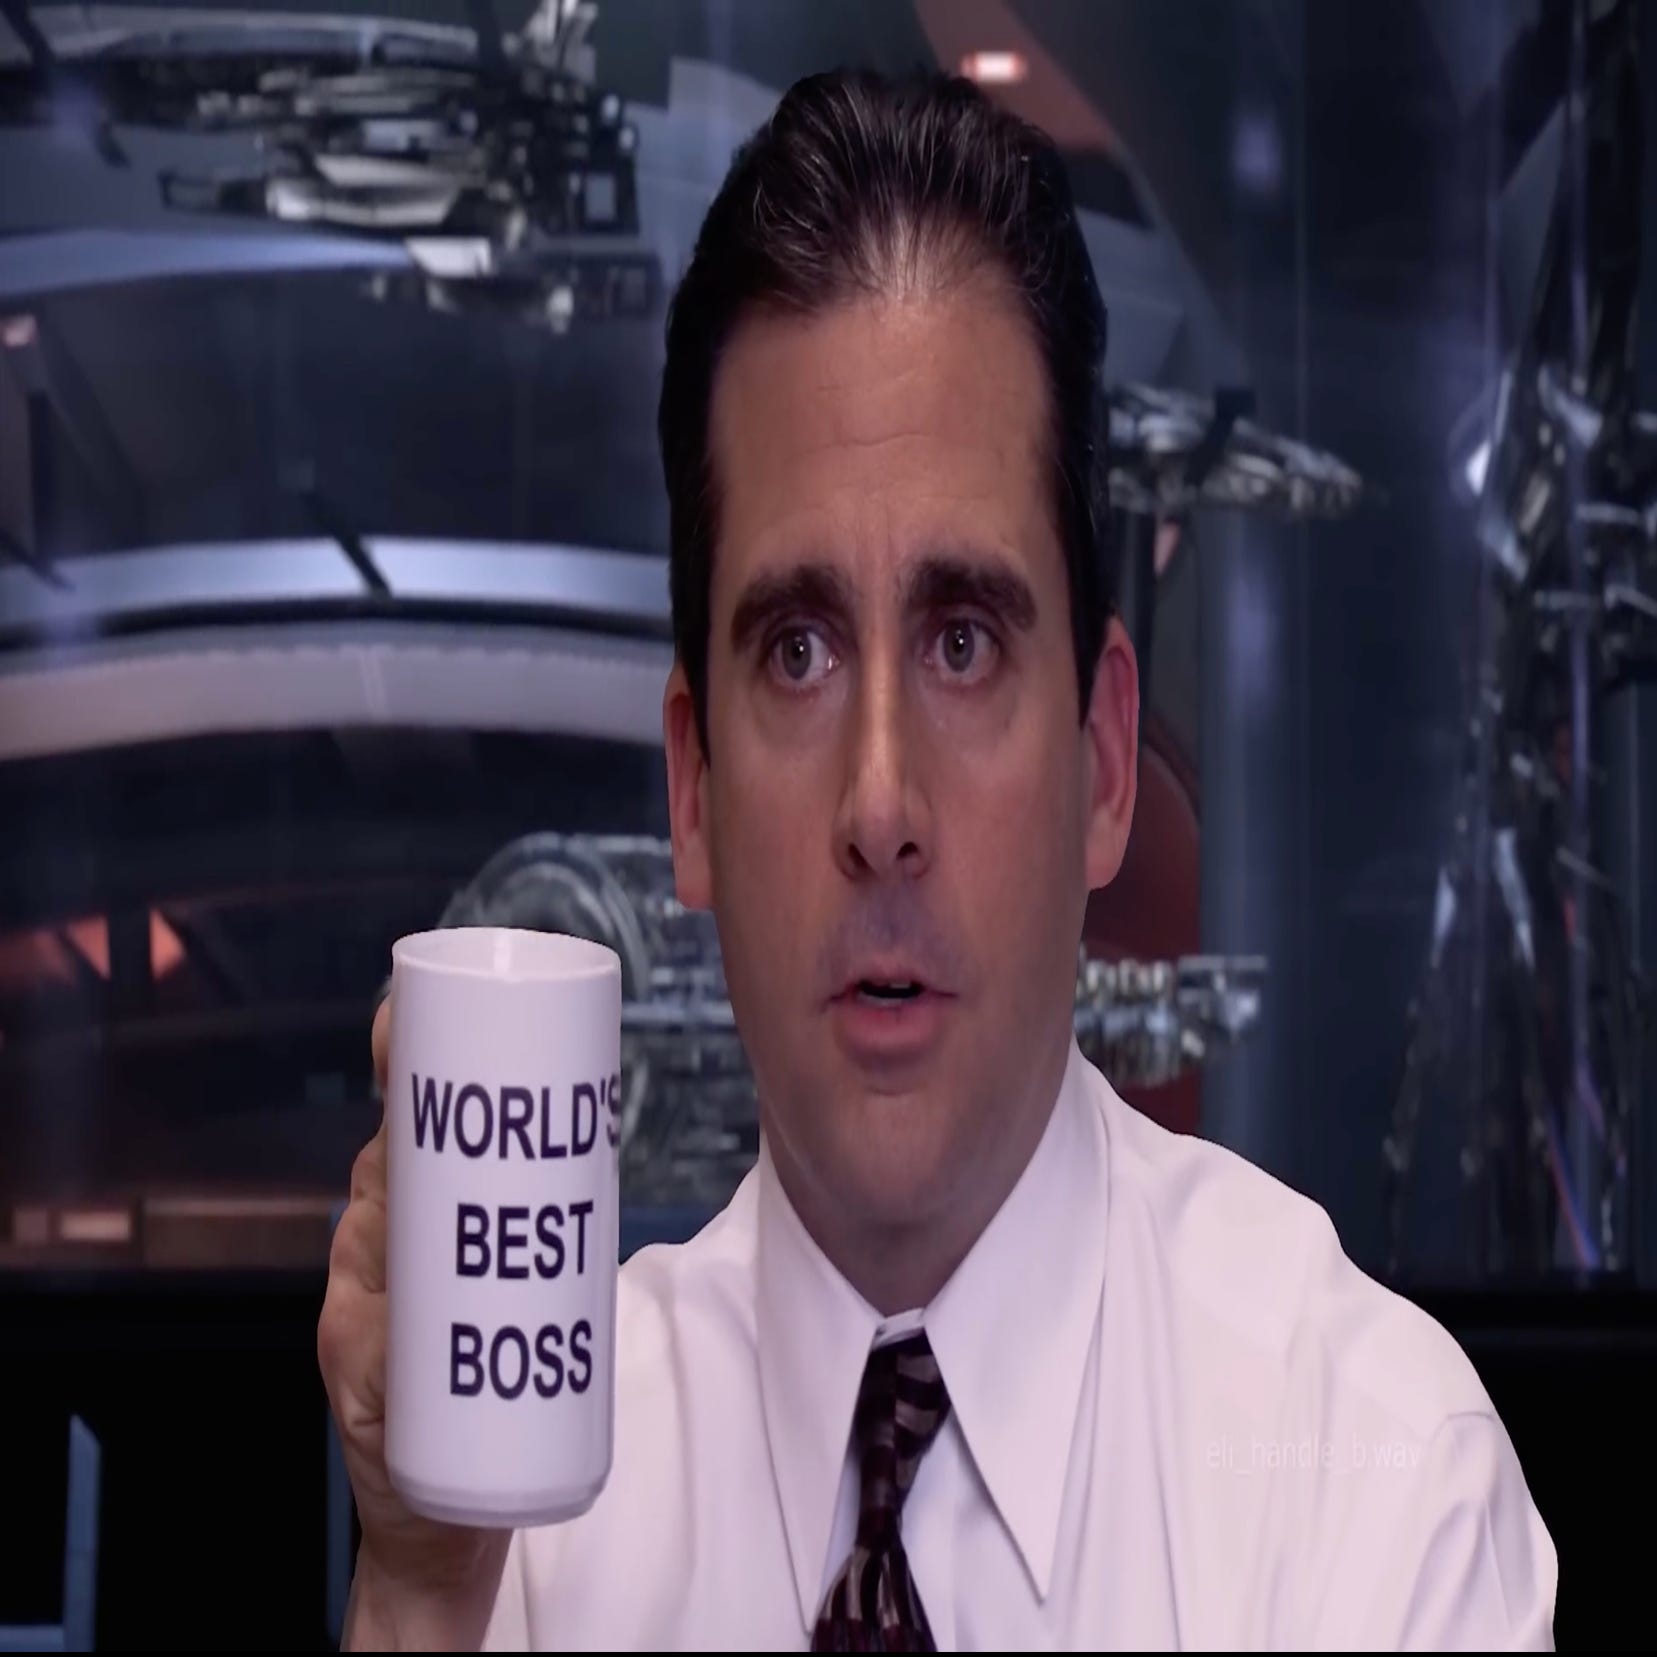 Watch Michael Scott from The Office take a stab at running the Mass Effect  crew | Rock Paper Shotgun